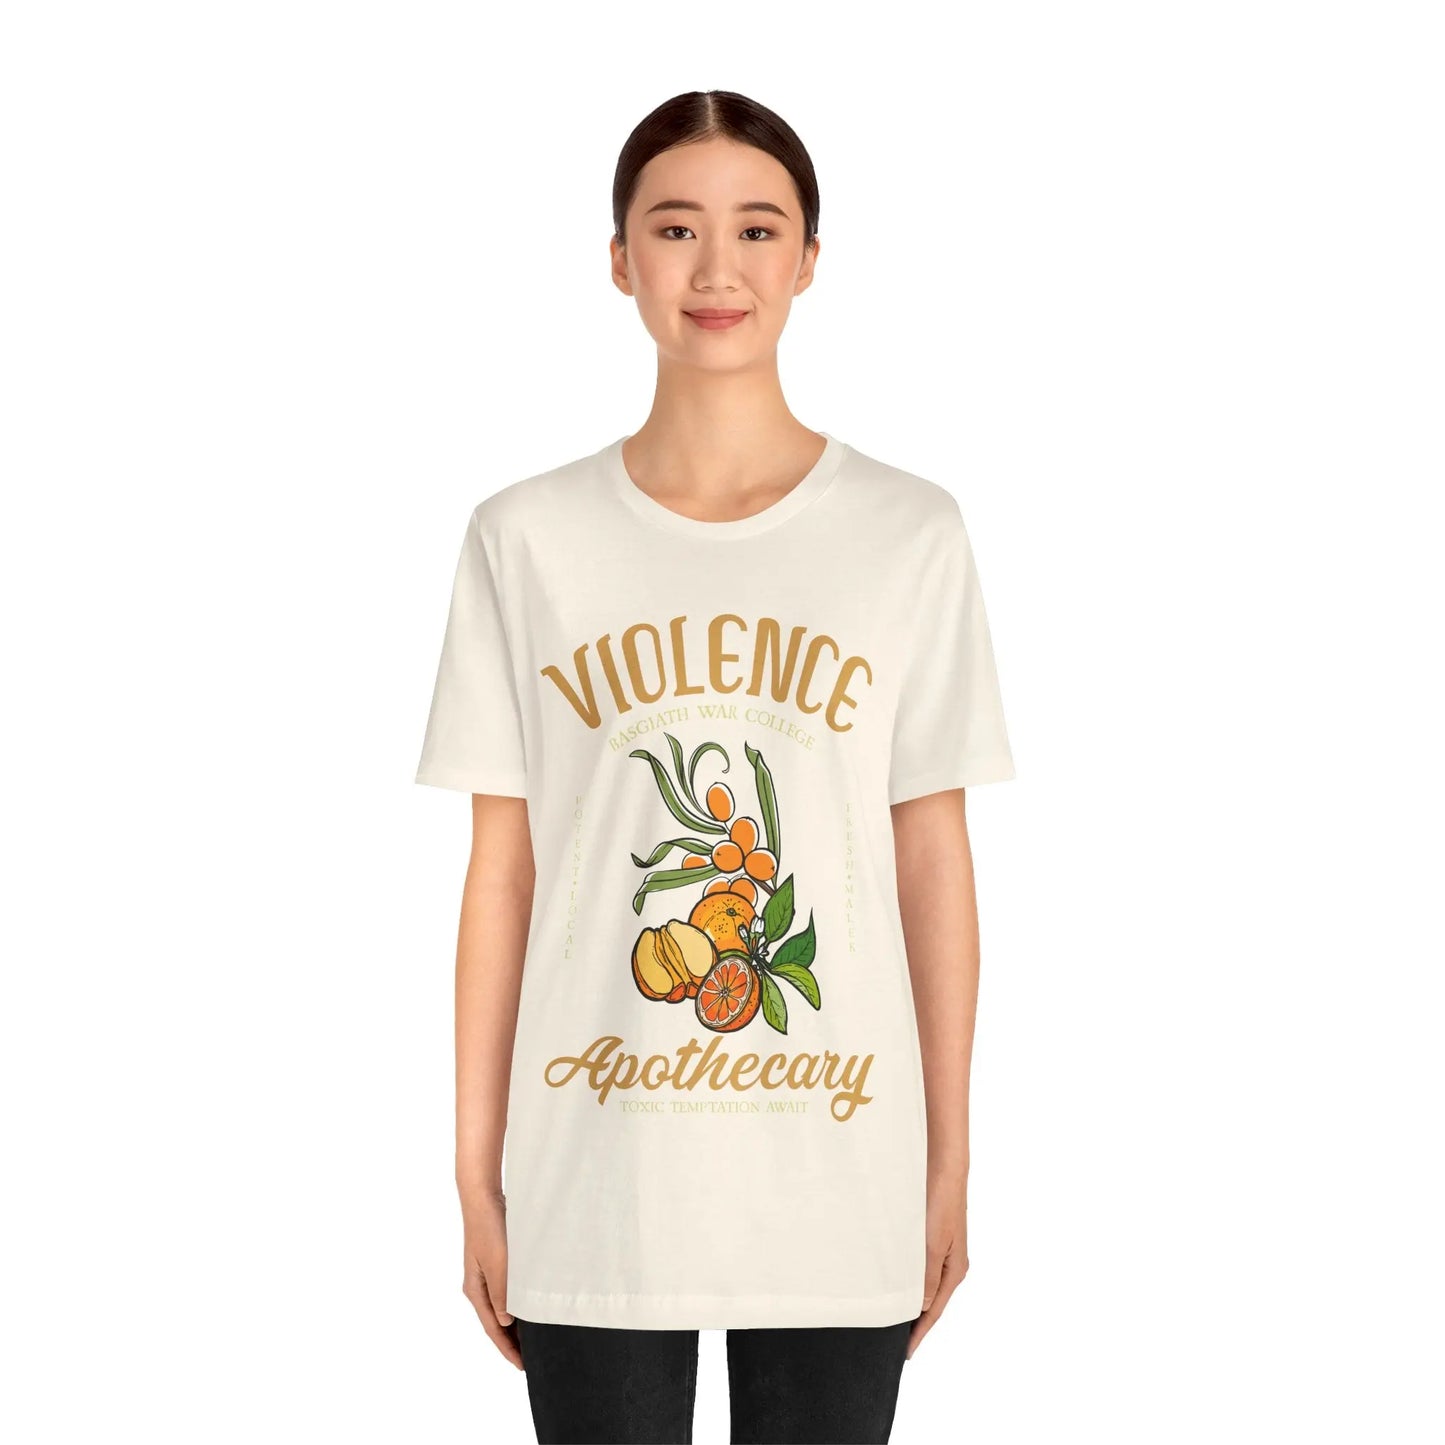 Onyx Storm Fourth Wing Iron Flame Vintage-Style Violence Basgiath War College Apothecary T-Shirt Inspired by Rebecca Yarros BookTok Book Club Empyrean Series Fantasy Printify